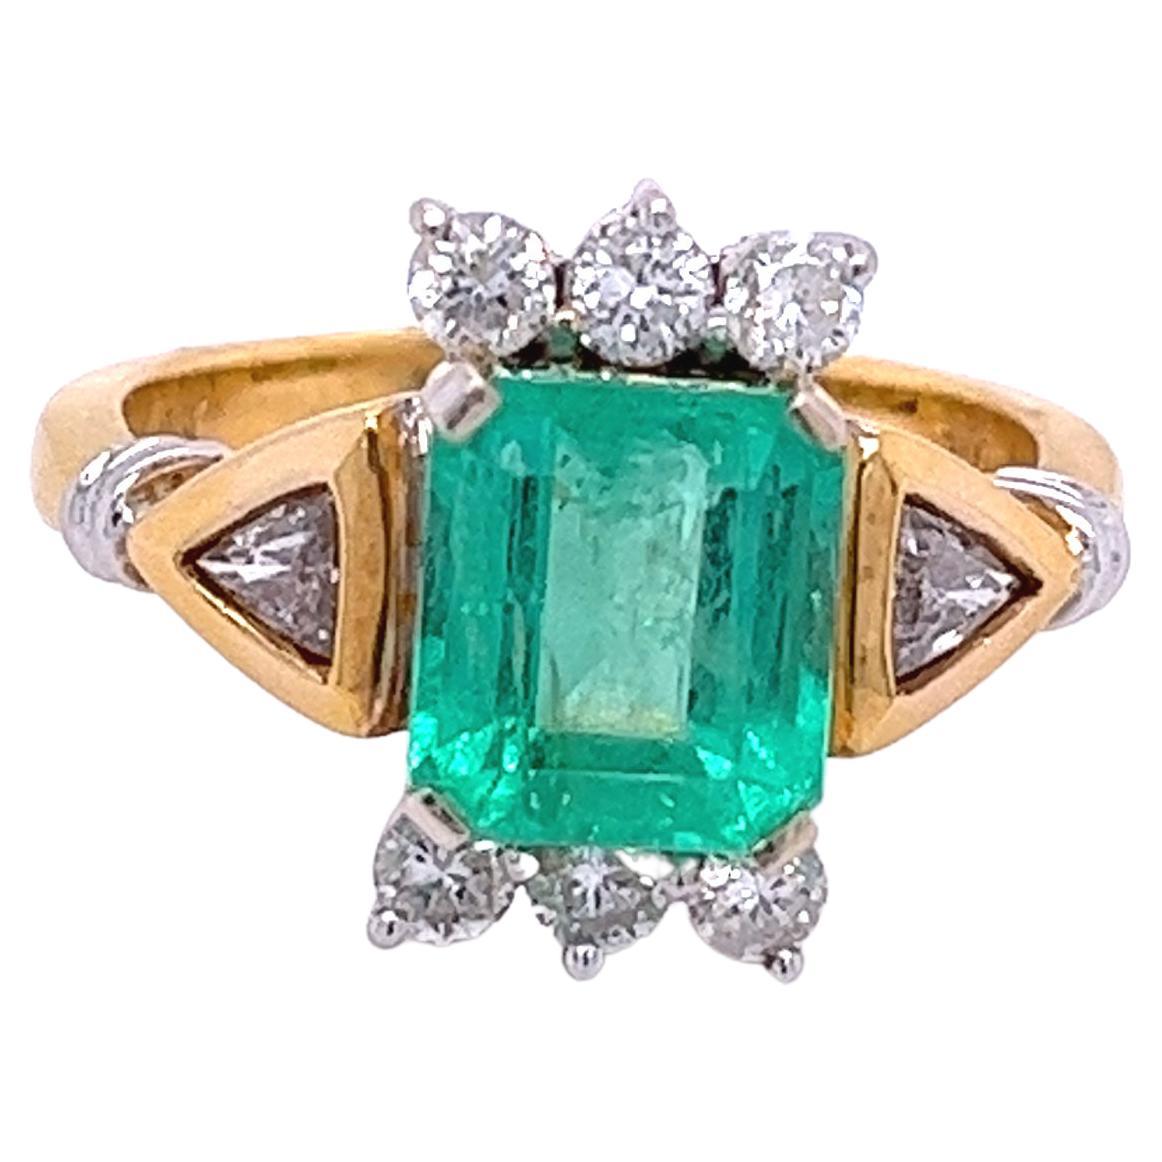 2.77 Carat Colombian Emerald and Trillion Cut Diamonds in 18k Yellow Gold Ring